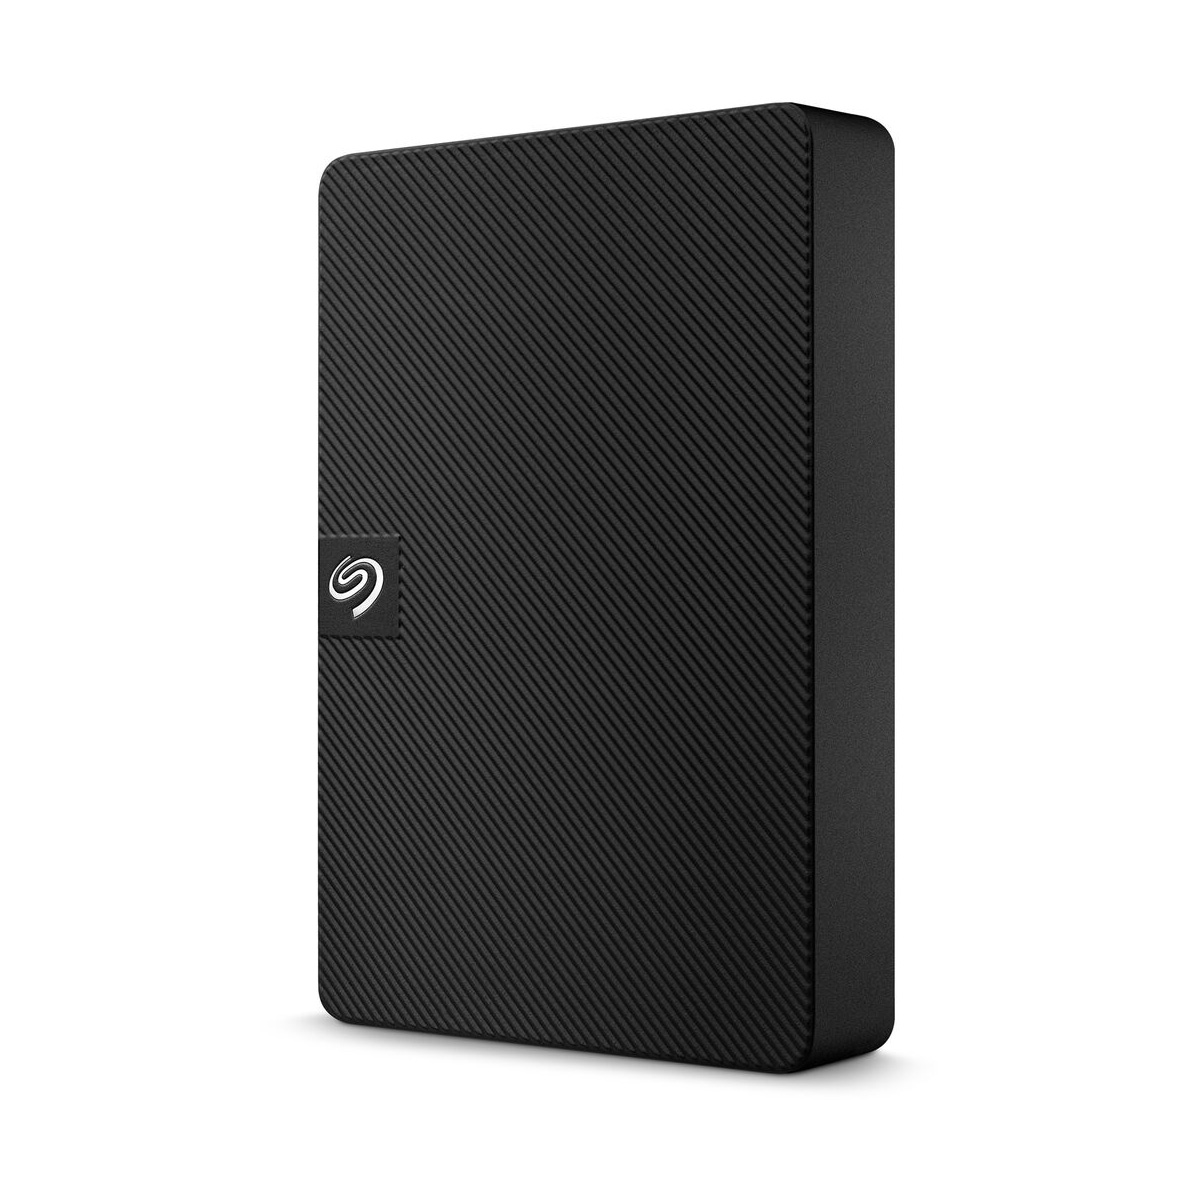 Ổ cứng Seagate Expansion 2021